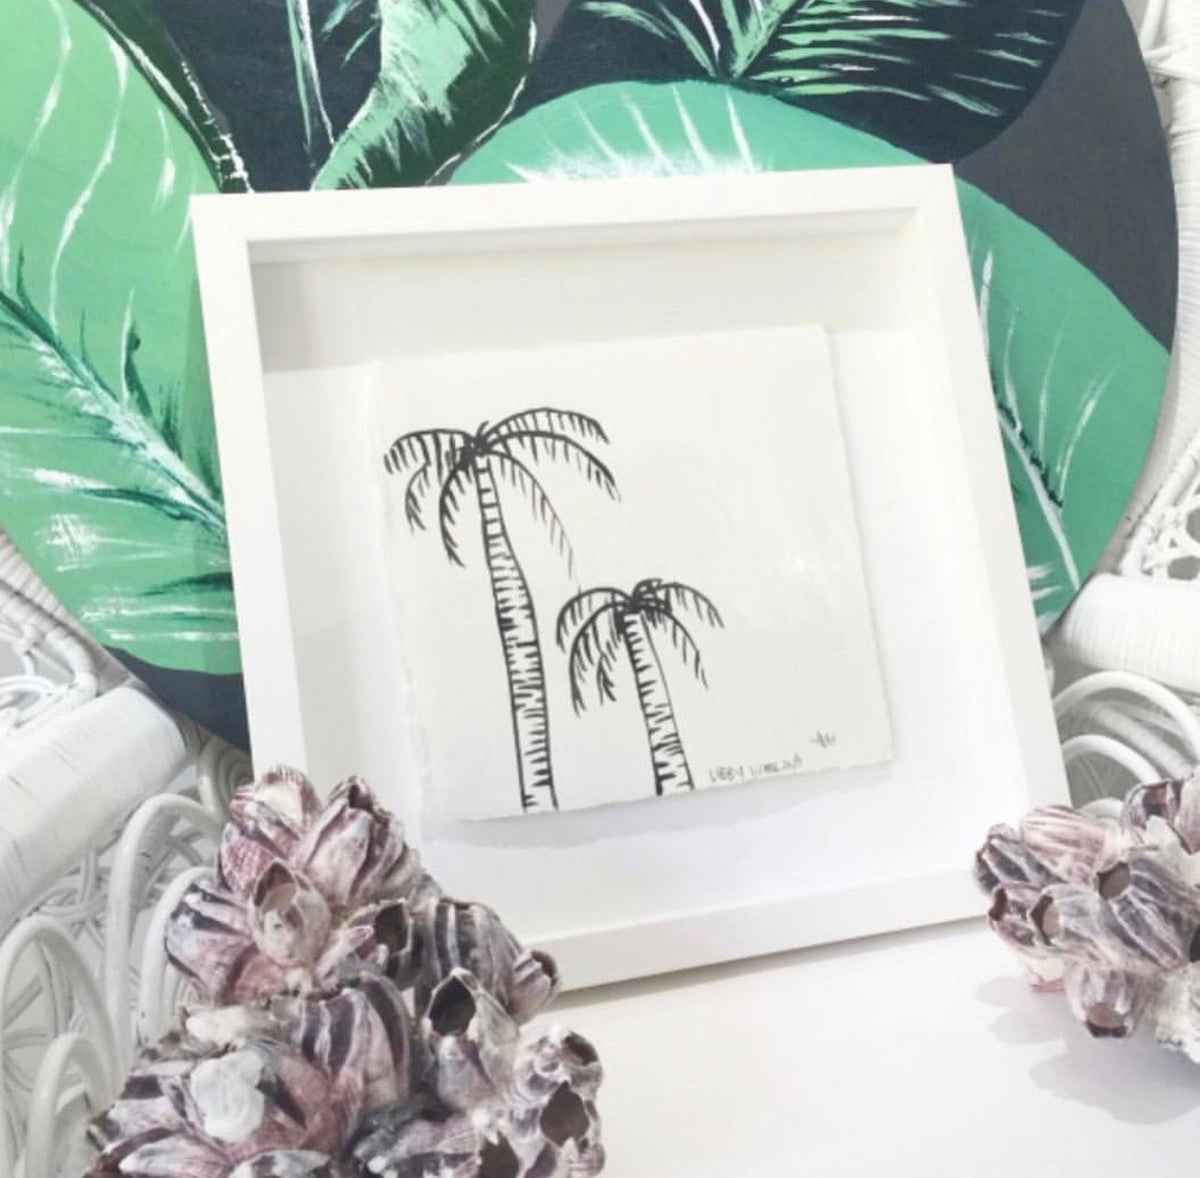 Signature Chanel Coco Paradiso Ink Palm  made to order with artist Li –  Libby Watkins